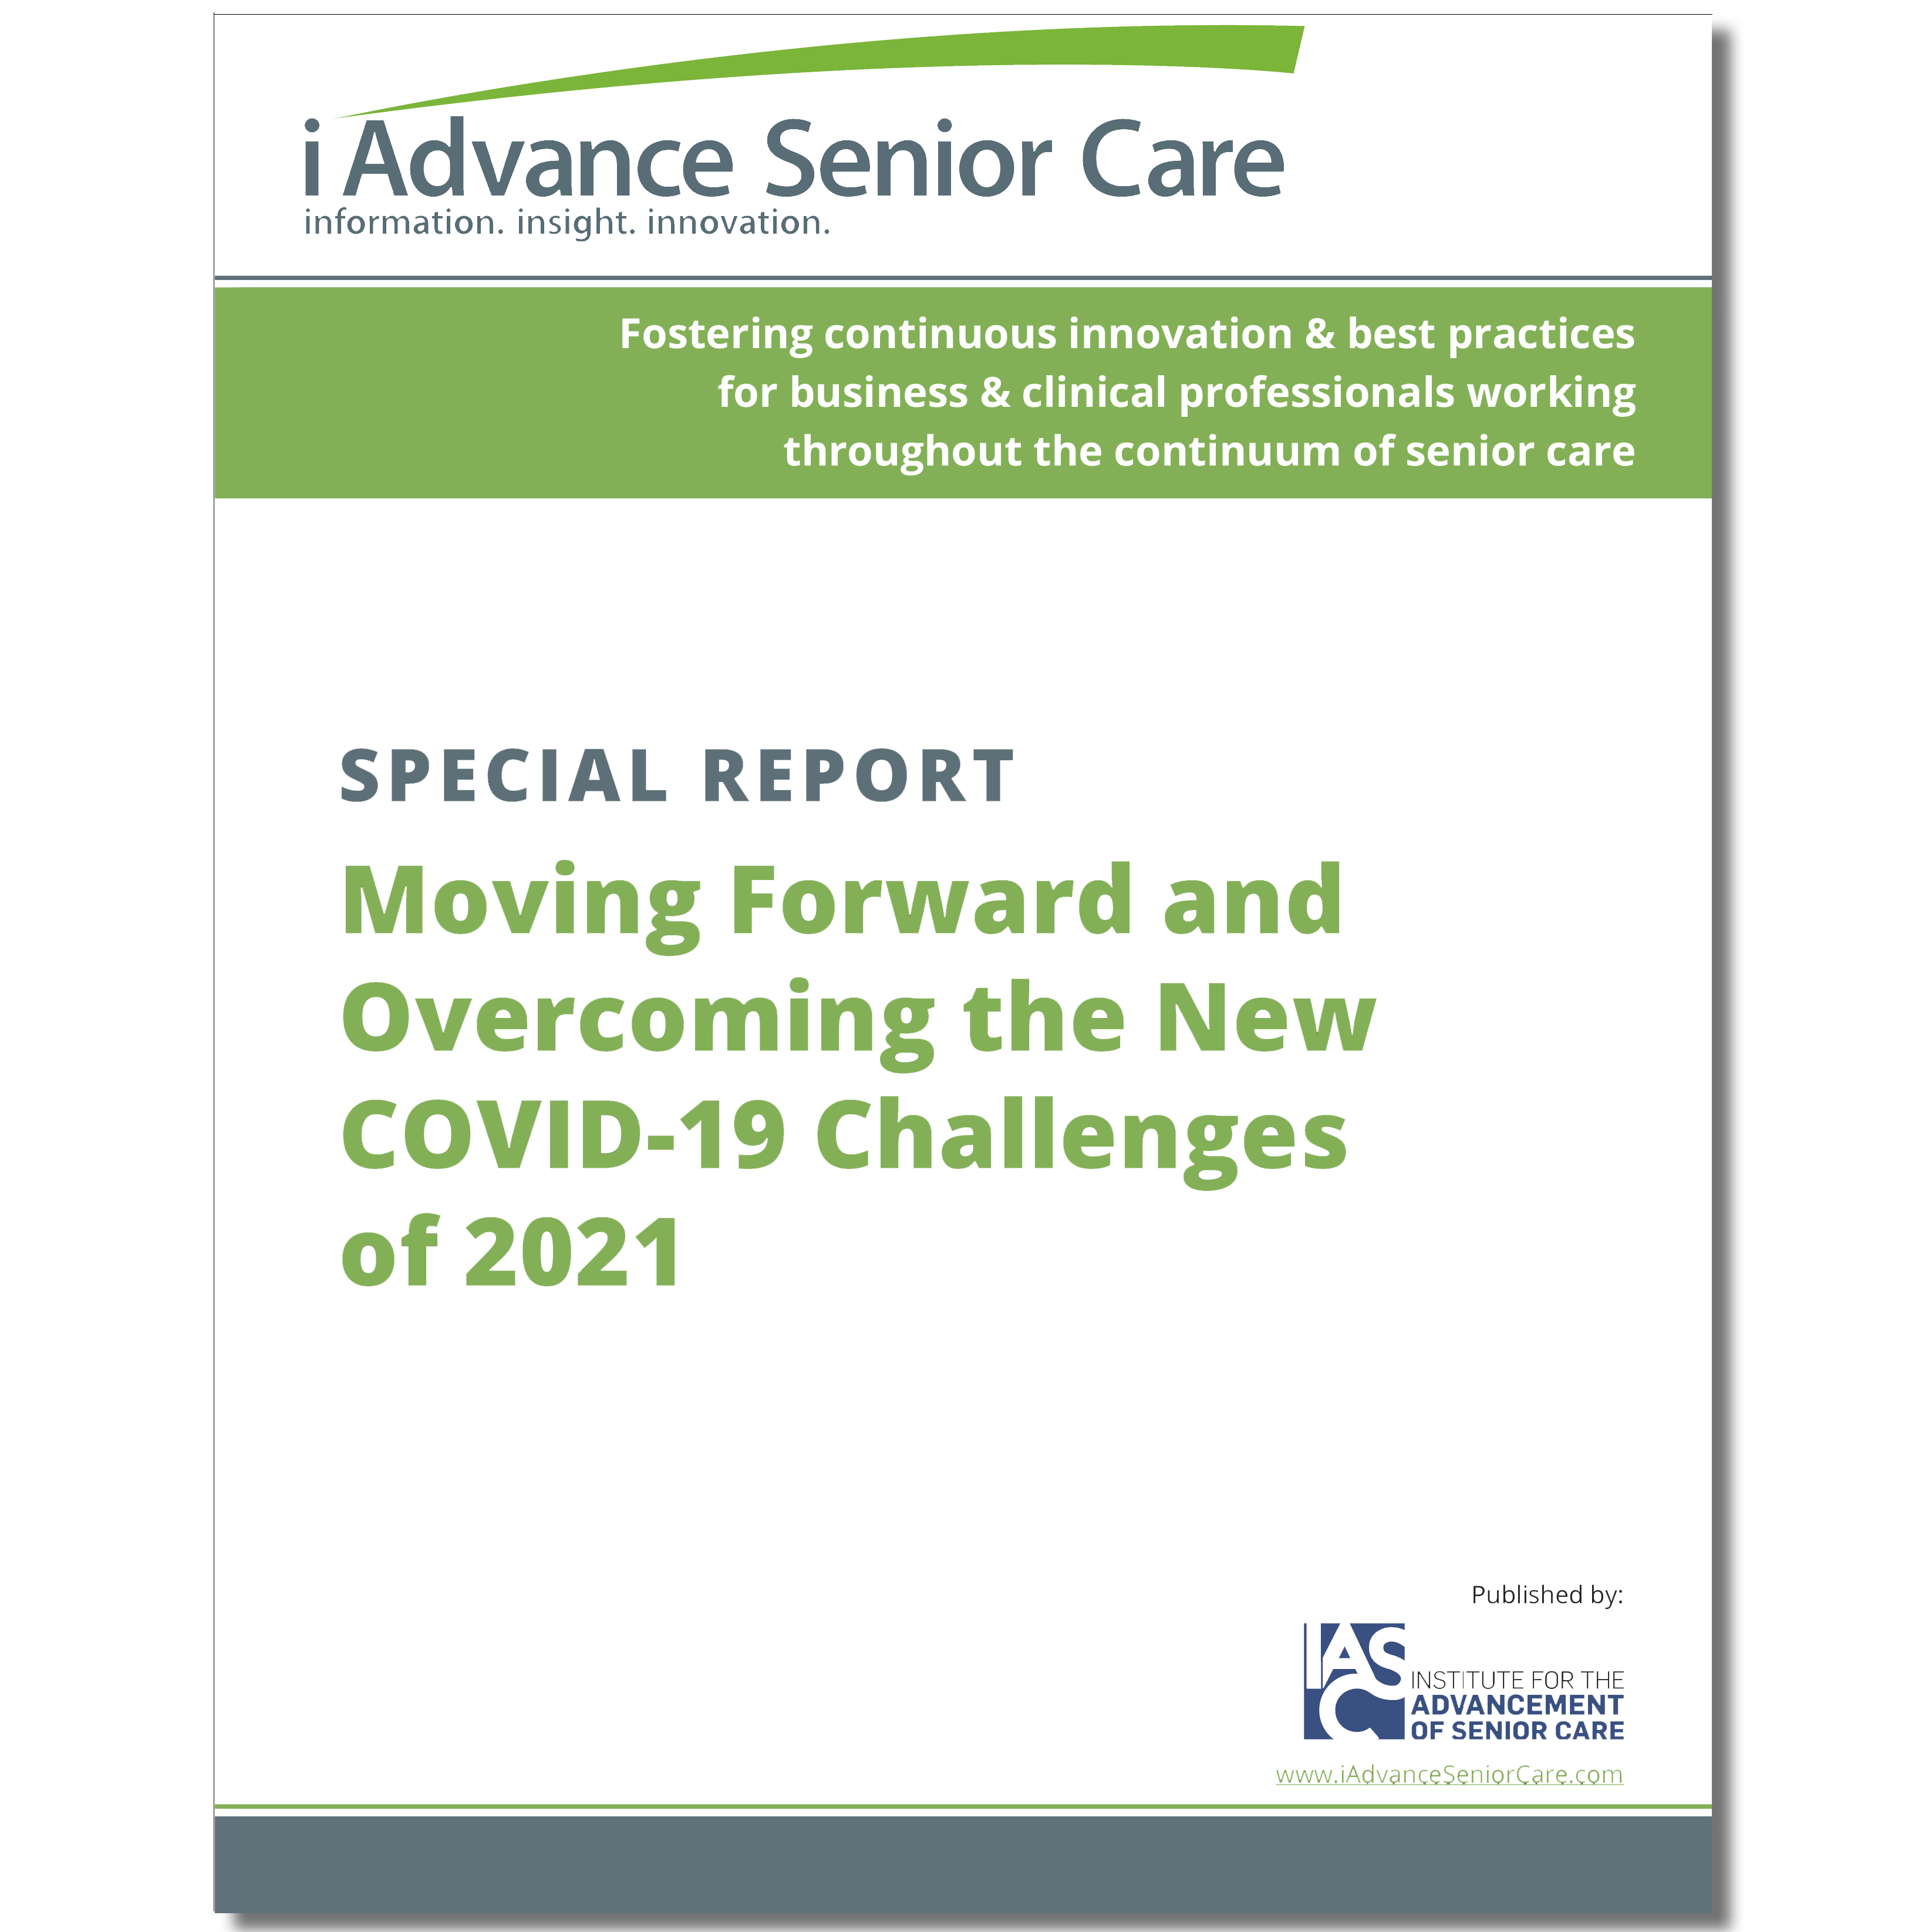 special report 2021 - Moving Forward (squared)